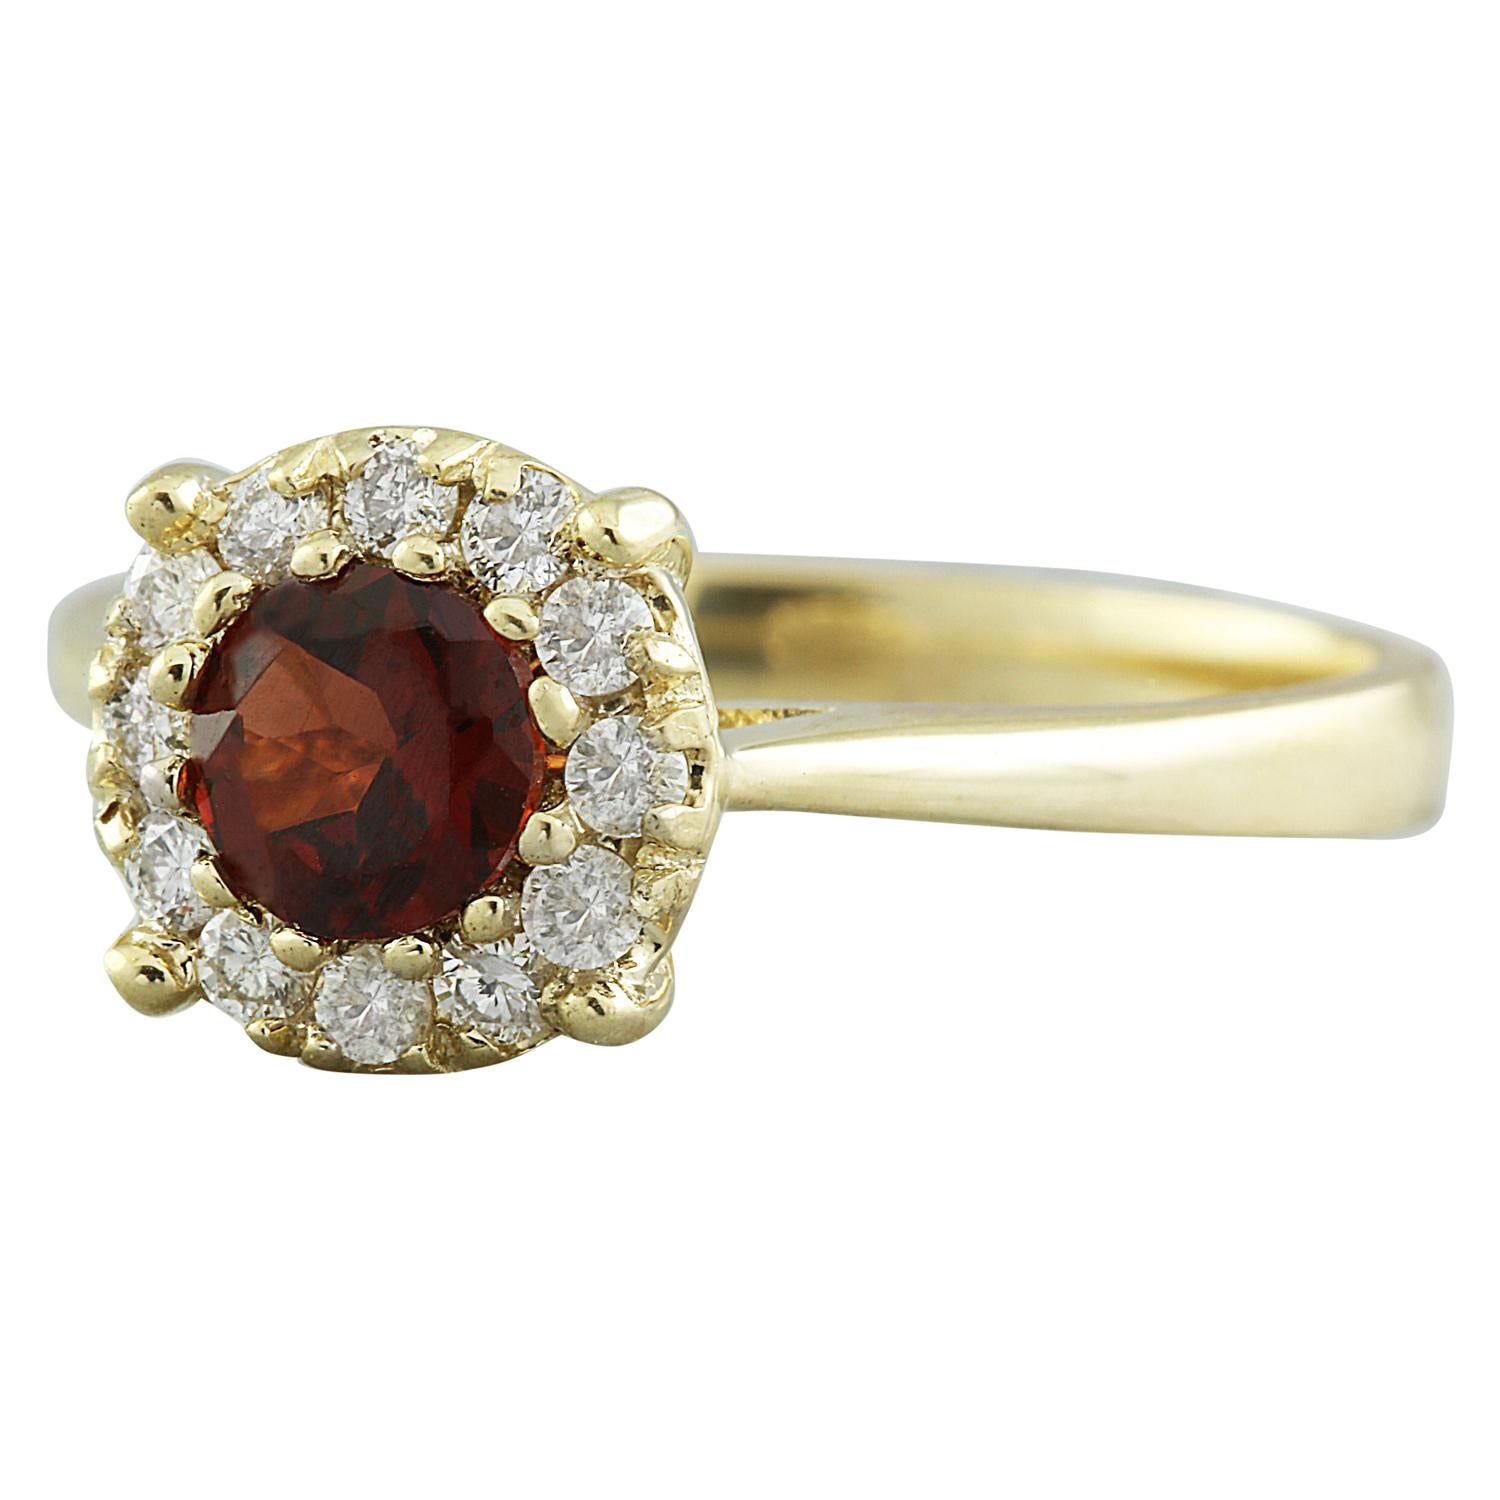 0.72 Carat Natural Garnet 14 Karat Solid Yellow Gold Diamond Ring
Stamped: 14K 
Total Ring Weight: 2.9 Grams
Garnet Weight: 0.50 Carat (5.00x5.00 Millimeters) 
Diamond Weight: 0.22 carat (F-G Color, VS2-SI1 Clarity)
Quantity: 12
Face Measures: